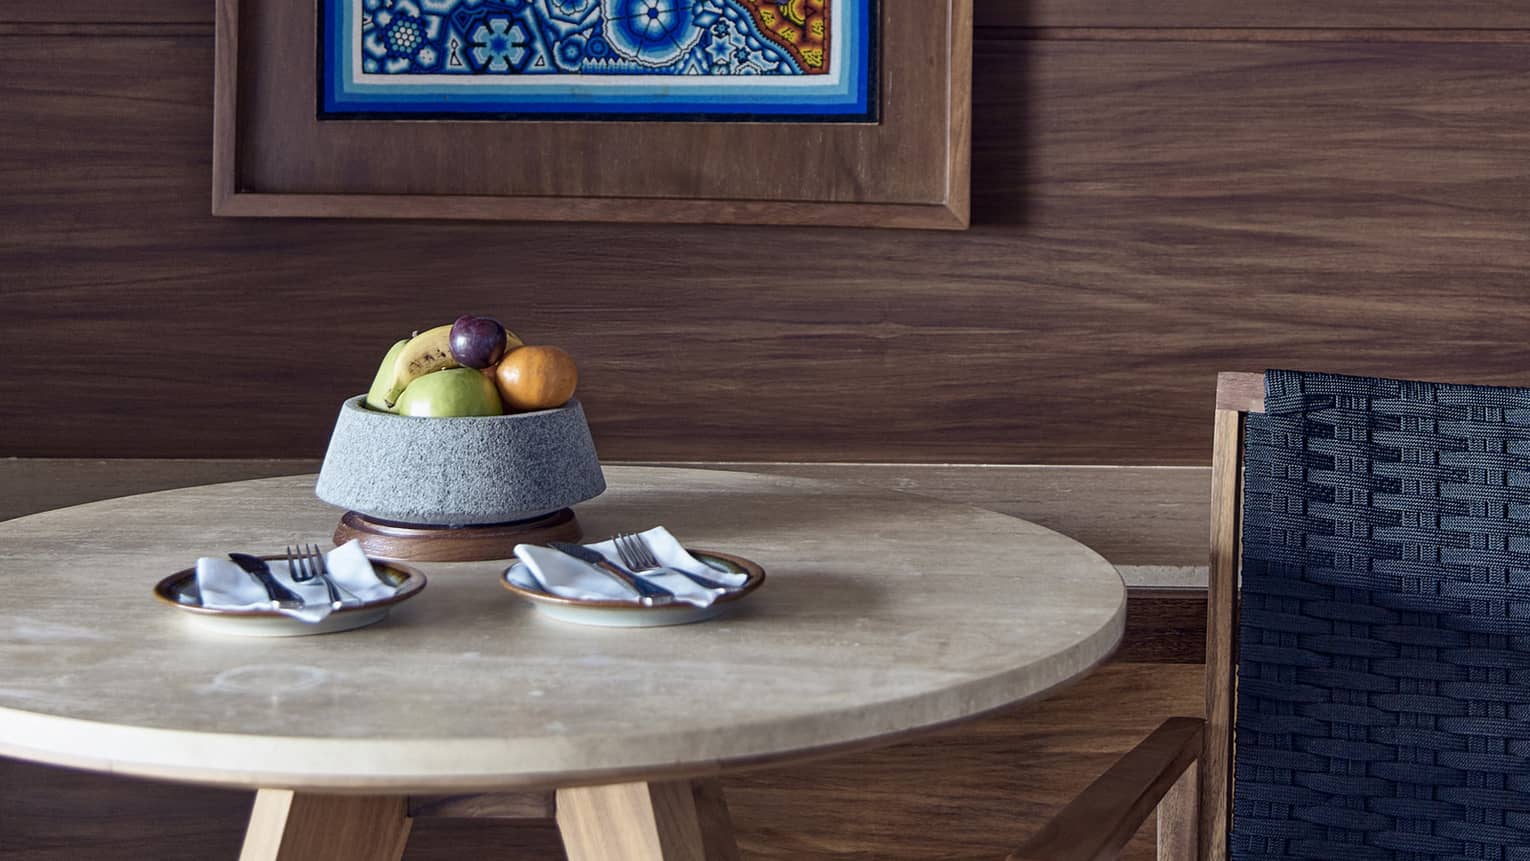 Circular table with bowl of fruit, arm chair, hanging artwork on wooden wall